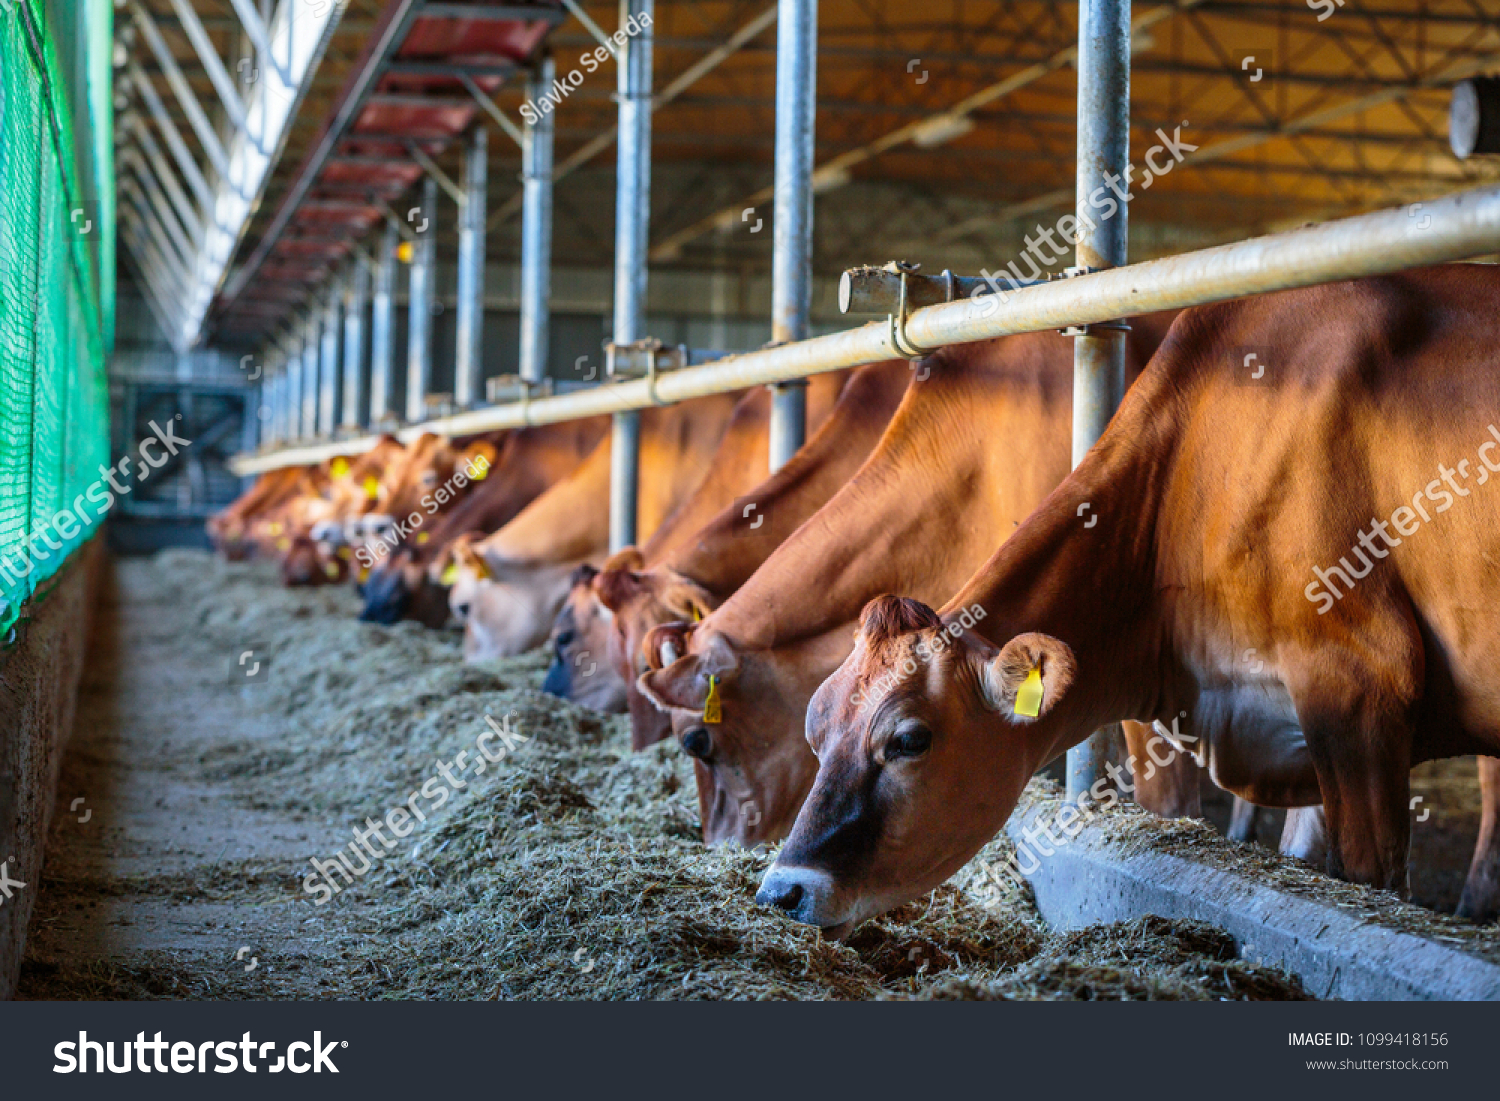 cows dairy breed of Jersey eating silos fodder in cowshed farm somewhere in central Ukraine, agriculture industry, farming and animal husbandry concept #1099418156